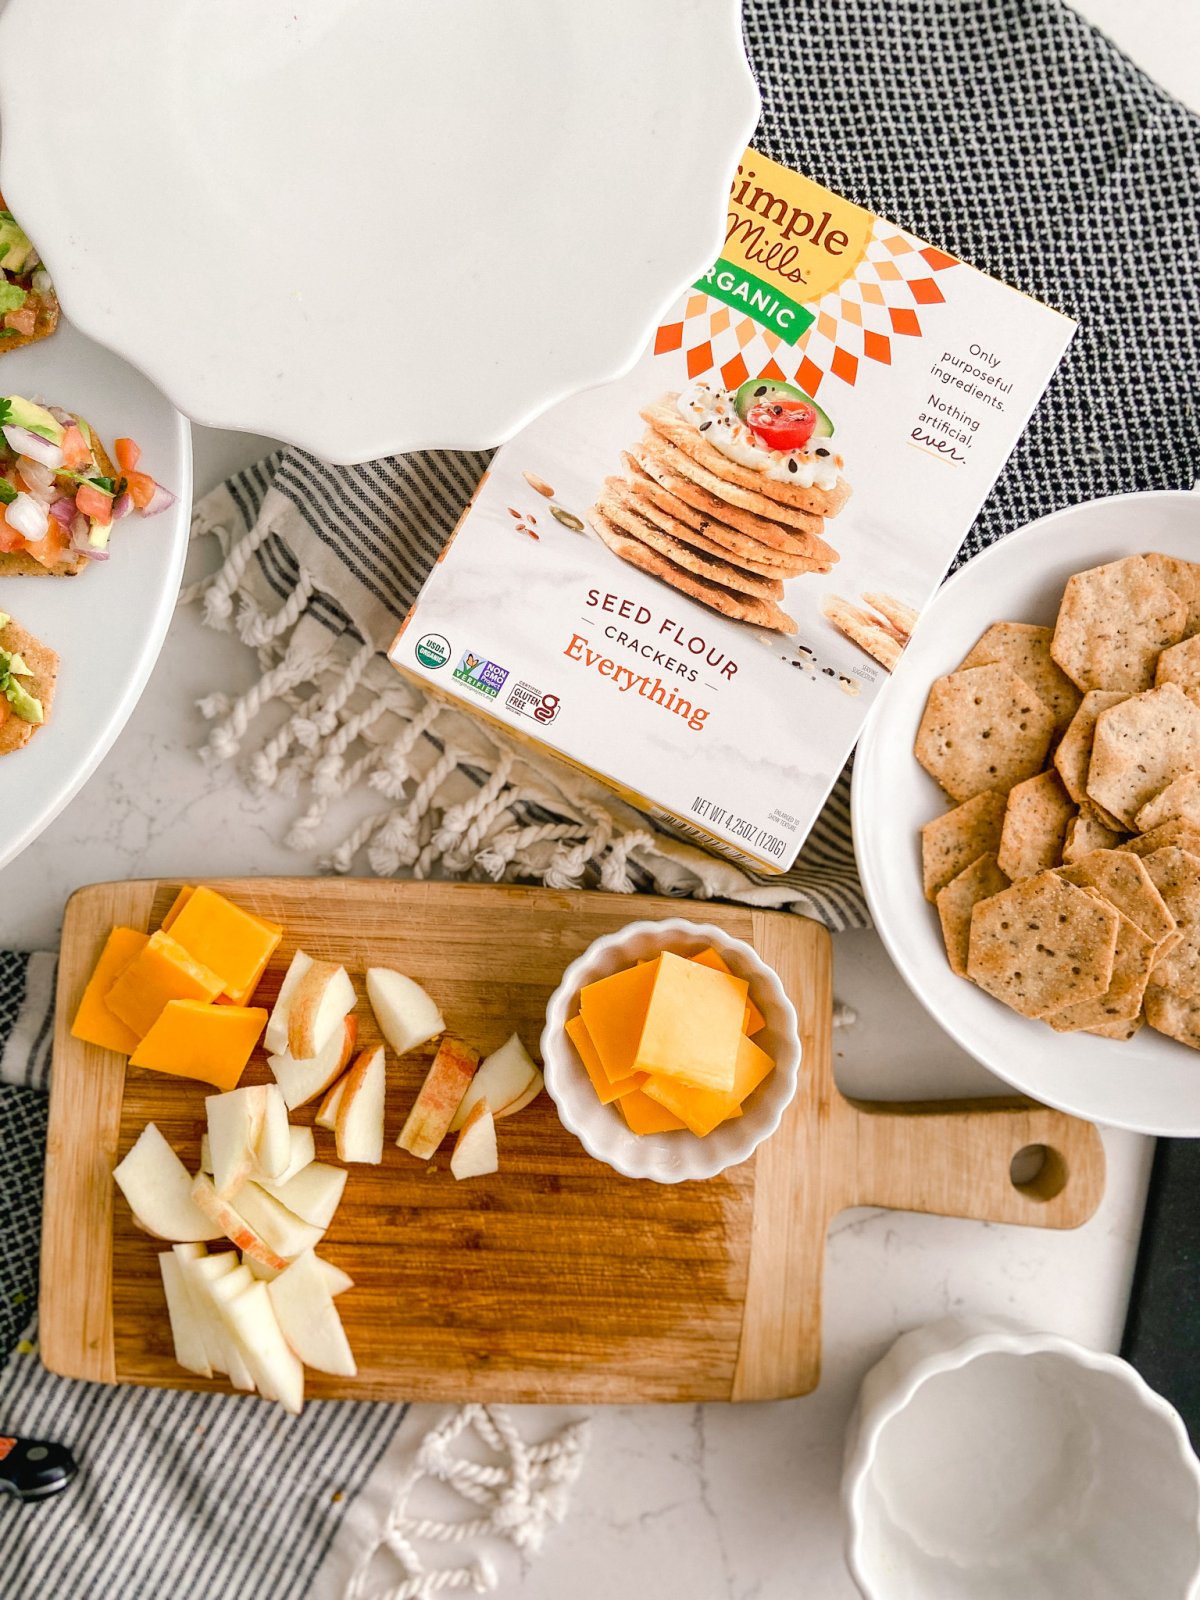 #ad 5 Easy and Delicious Cracker Topping Appetizers. Top Simple Mills Organic Seed Flour Crackers with FIVE different topping recipes for appetizers that will wow any crowd! #simplemillspartner #PowerToTheSeed